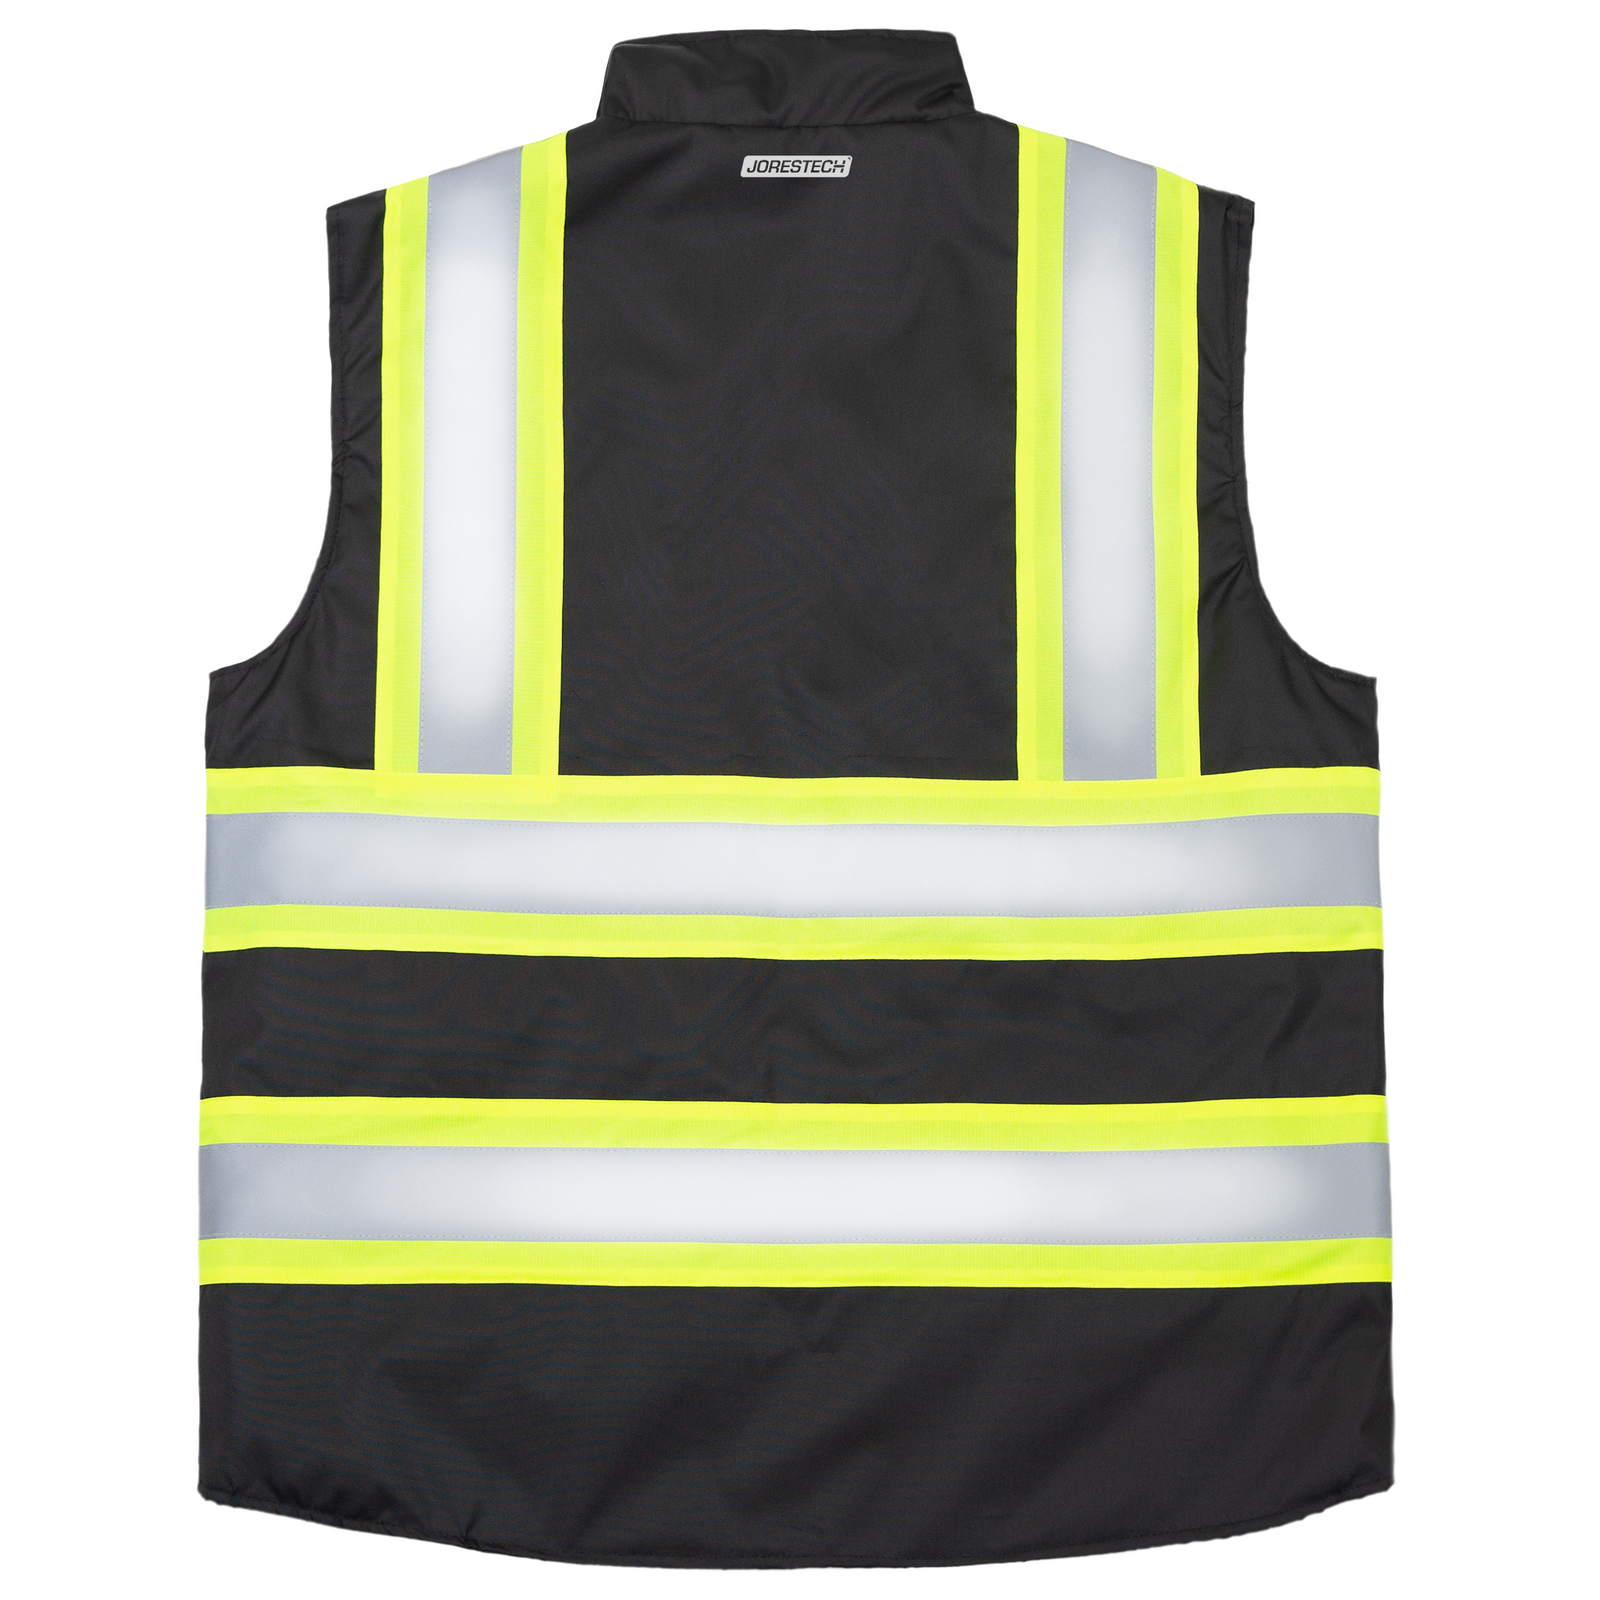 Back view of the JORESTECH® reflective black reversible insulated reflective safety vest